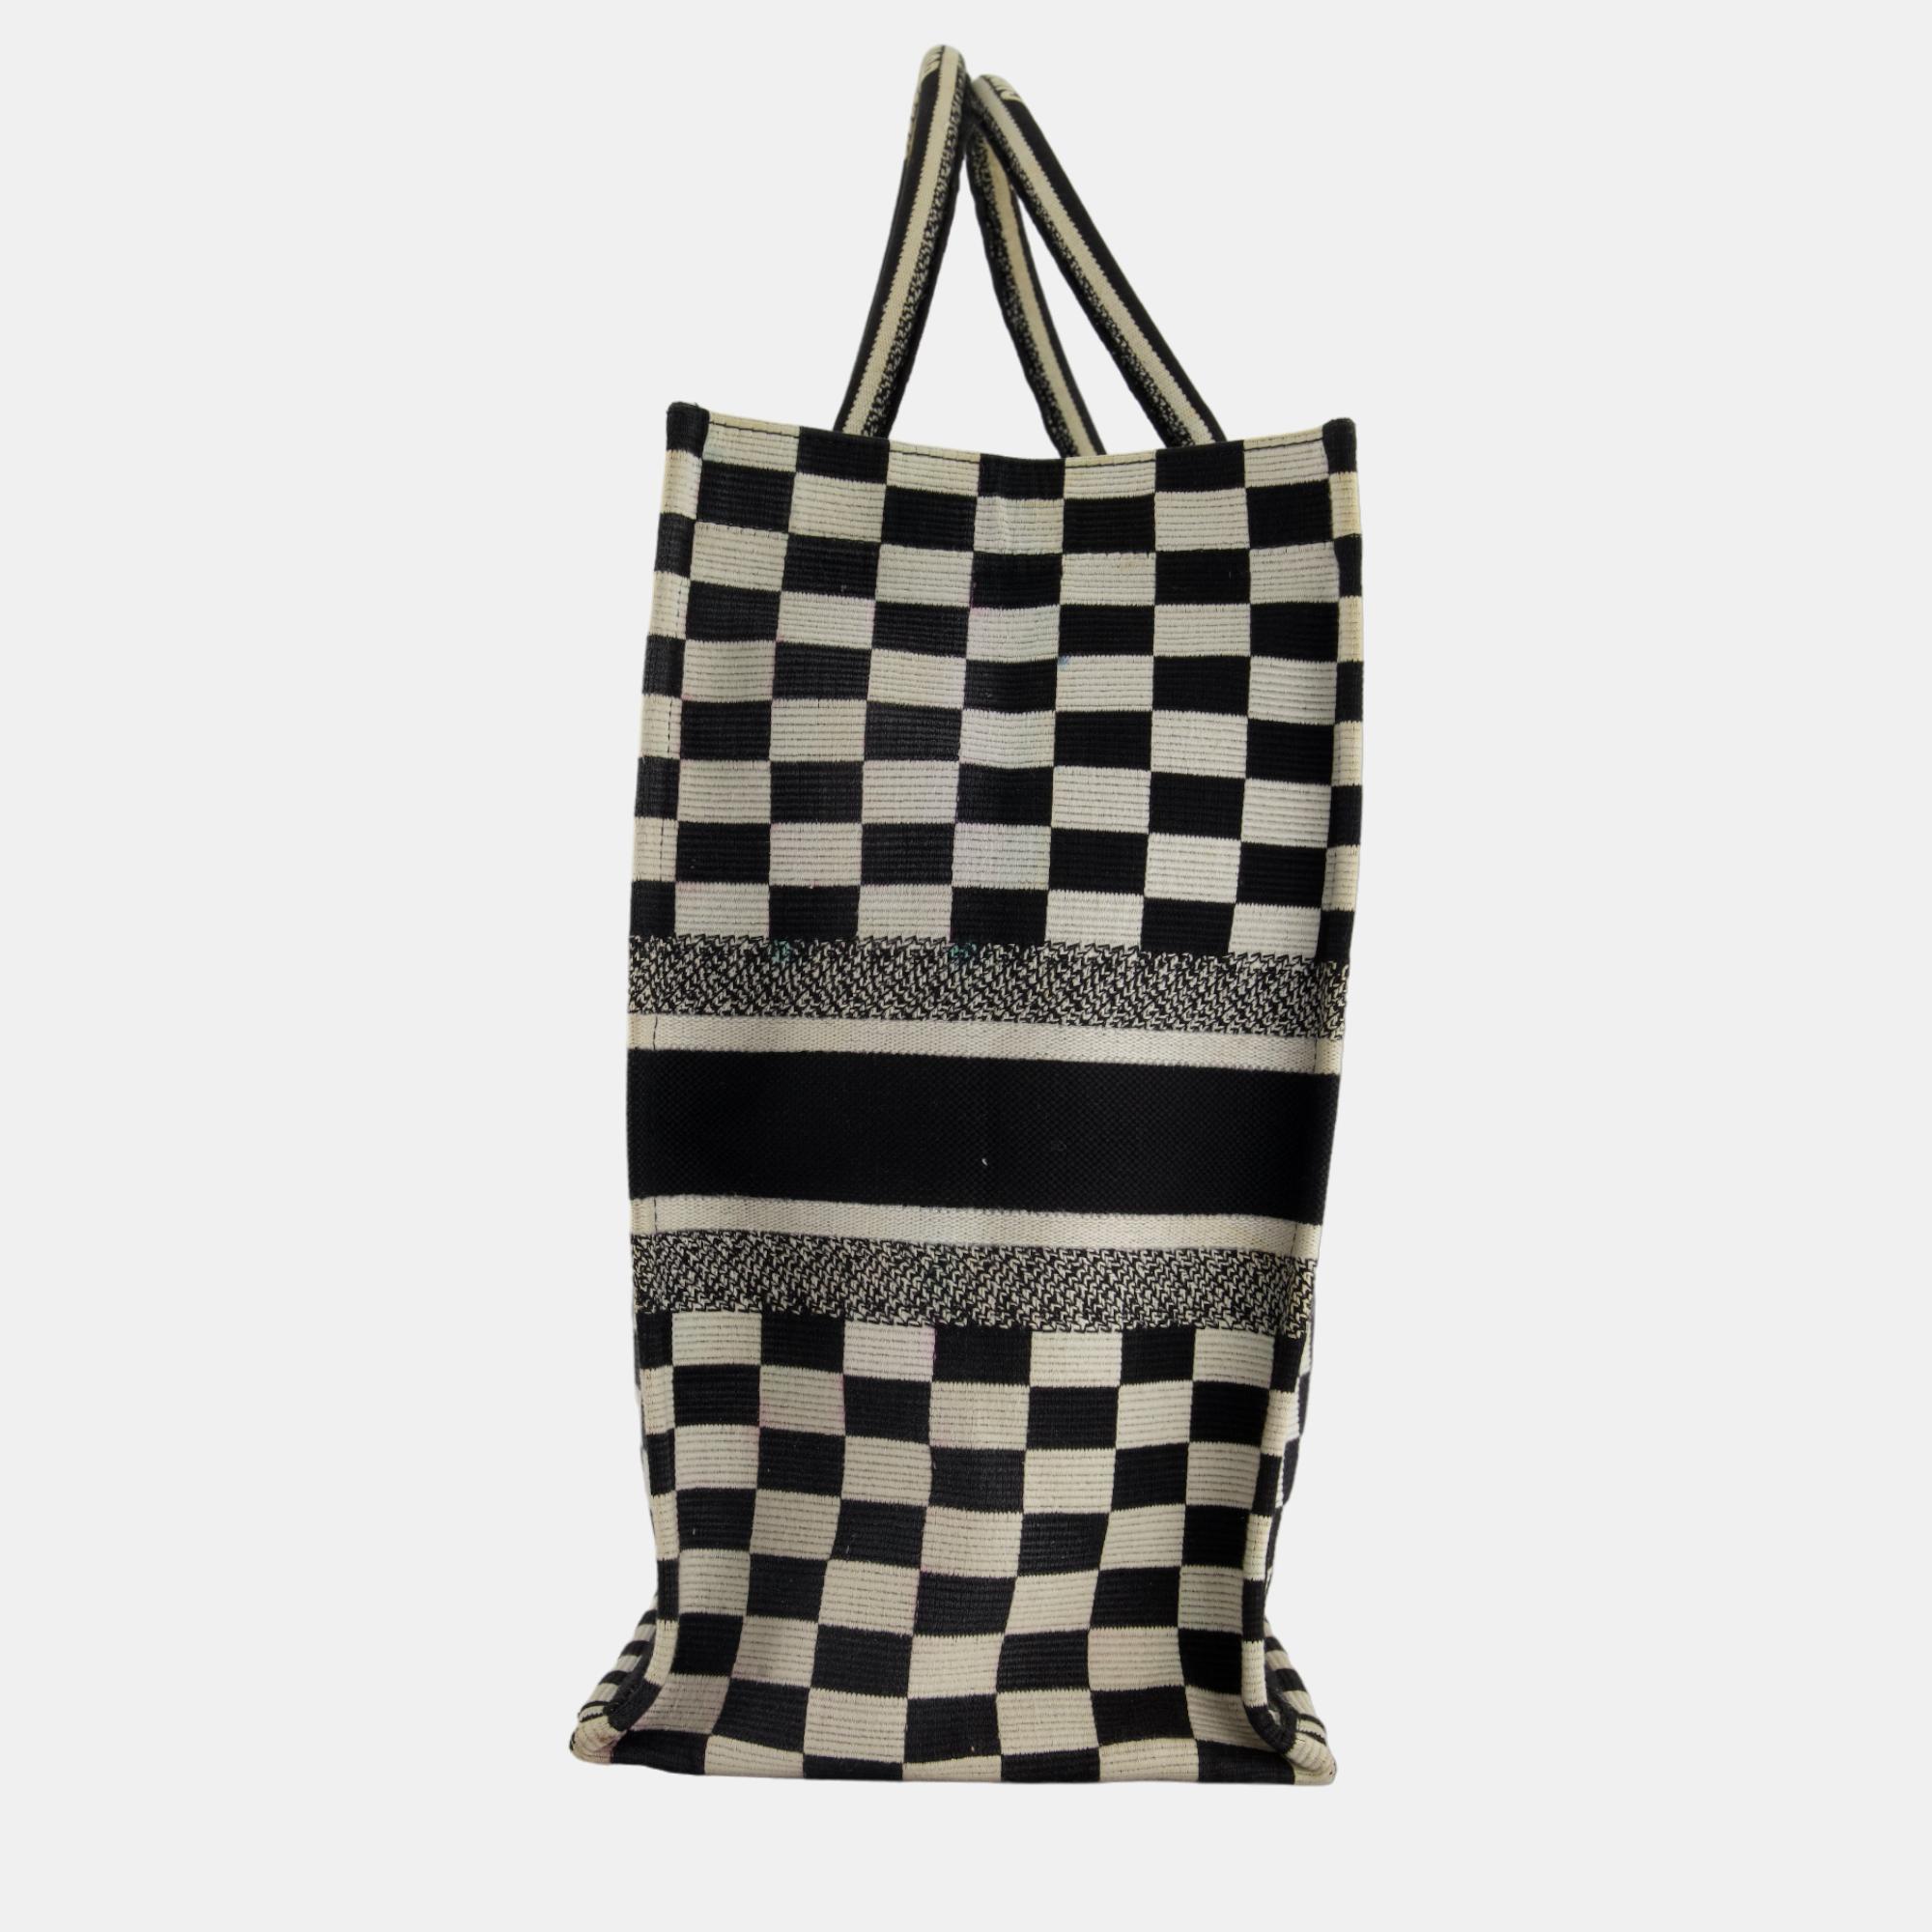 Christian Dior Large Black And White Chequered Book Tote Bag